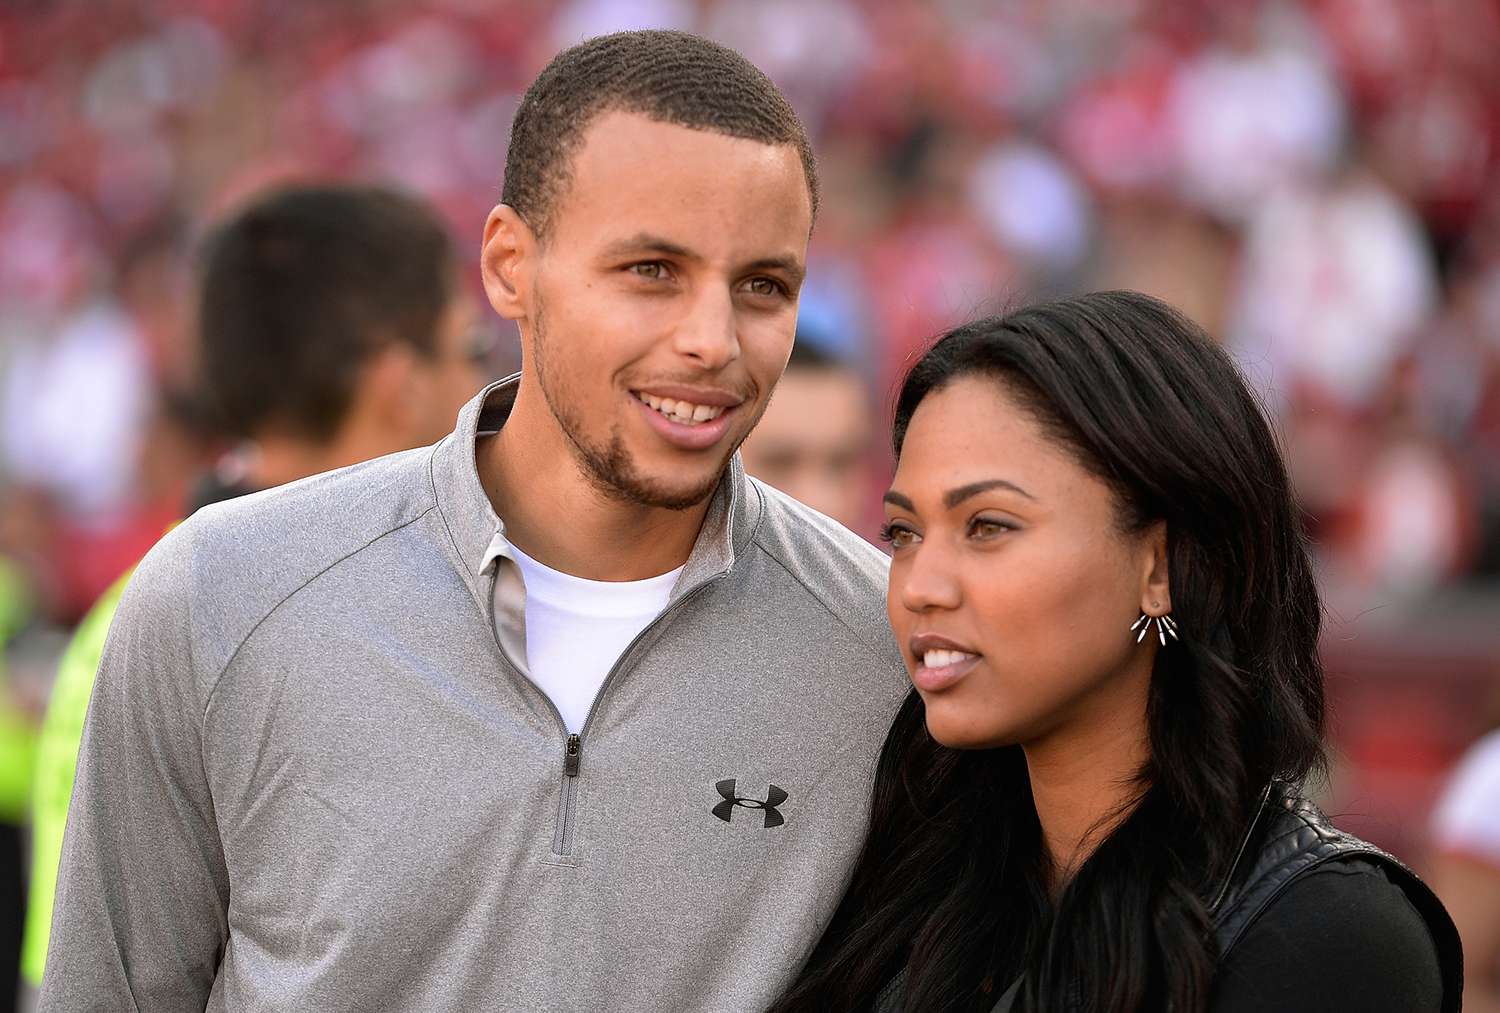 Stephen Curry and his wife Ayesha are fans on the sidelines during the Carolina Panthers and San Francisco 49ers NFL Game at Candlestick Park on November 10, 2013 in San Francisco, California. The Panthers won the game 10-9